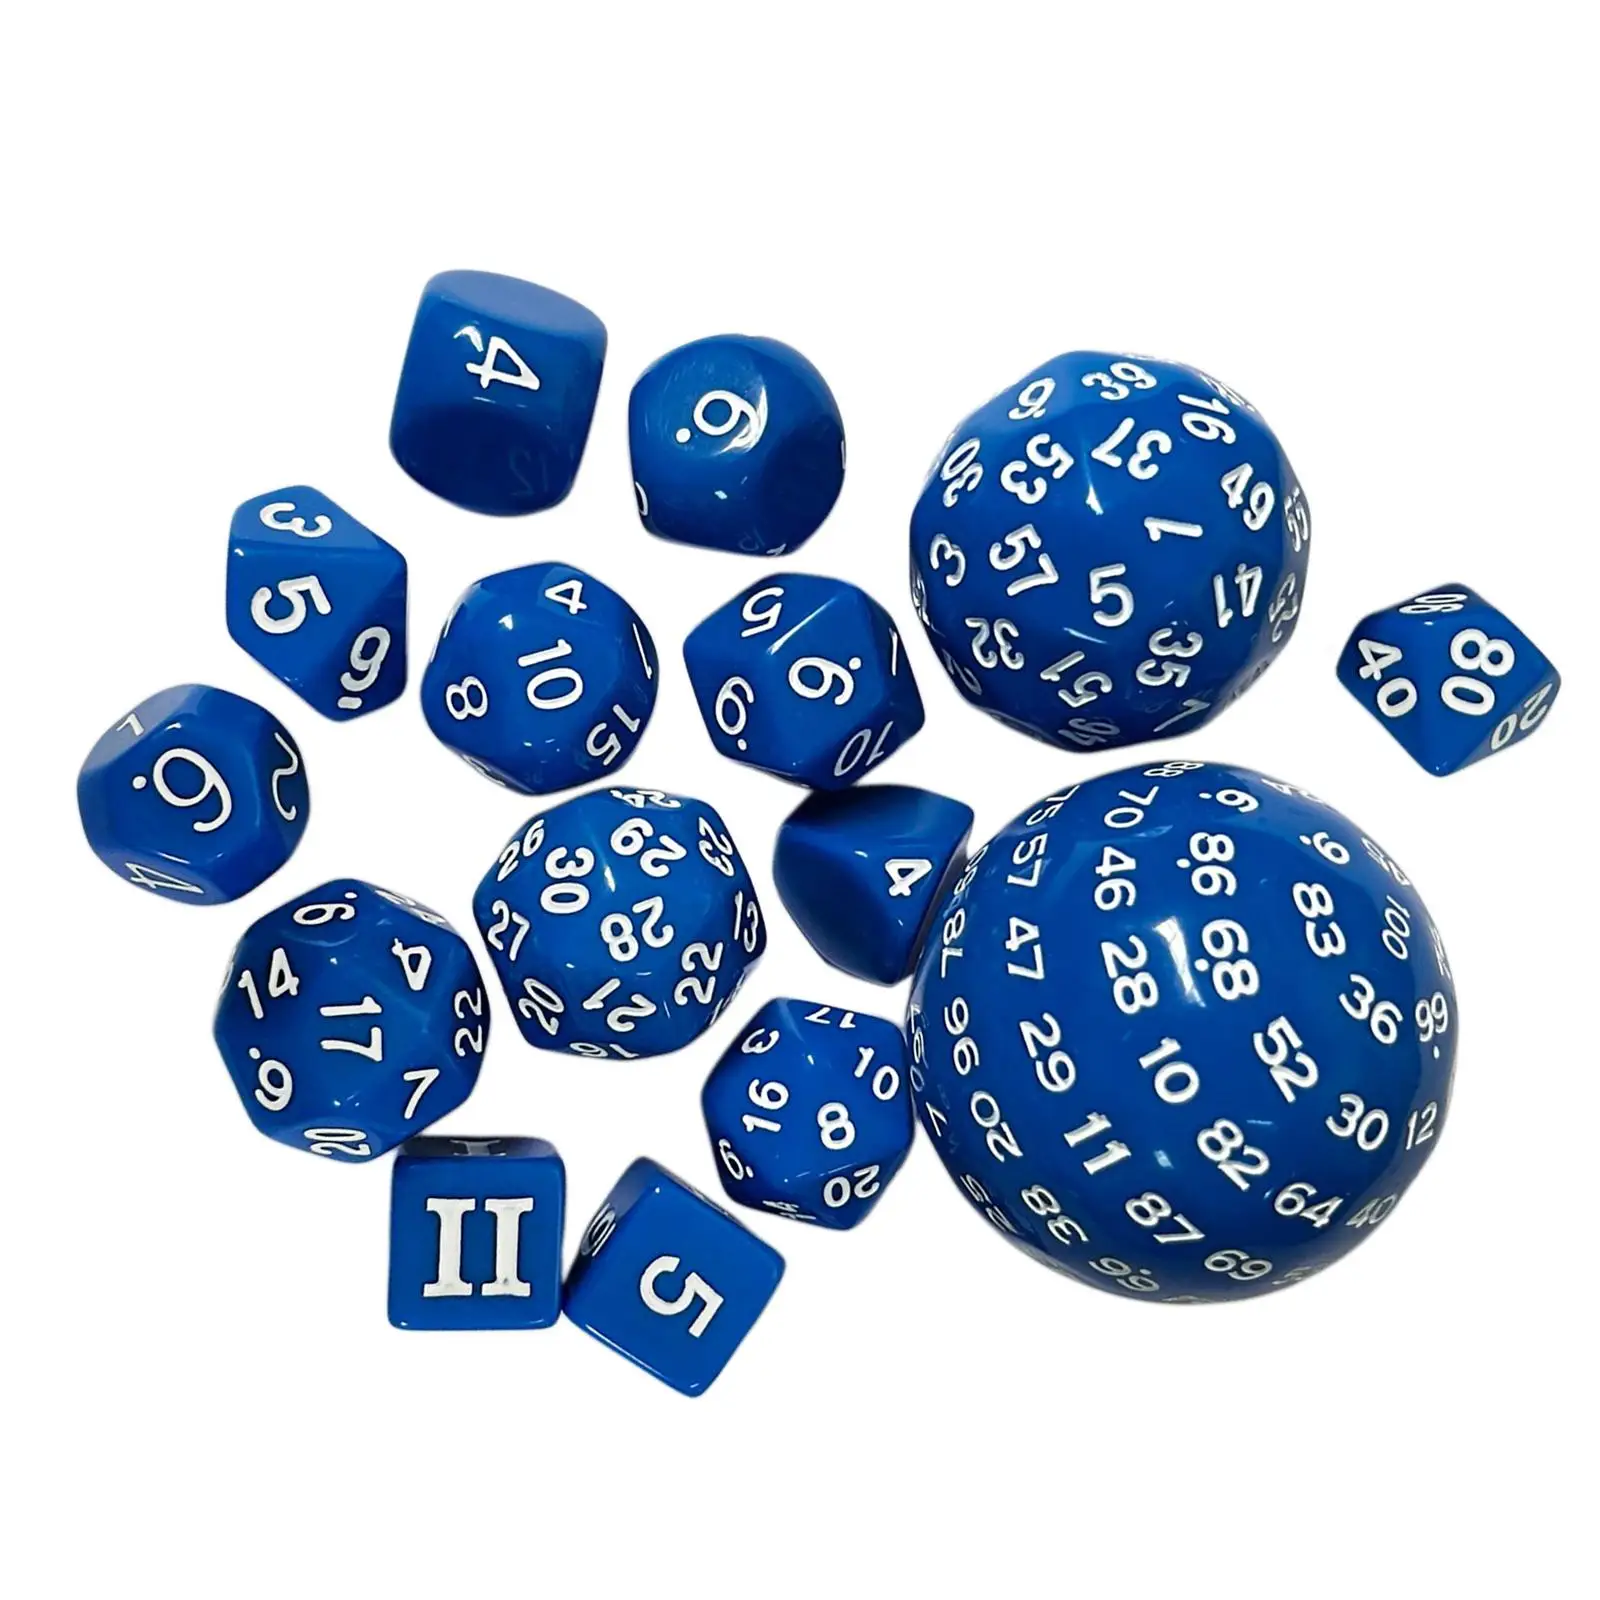 15 Pack Lightwheigt D100 D60 D30 D24 D20 D16 D12 D10 D8 D7 D5 D4 Dice Game Acrylic Multi Sided Game Dice Set for Role Playing